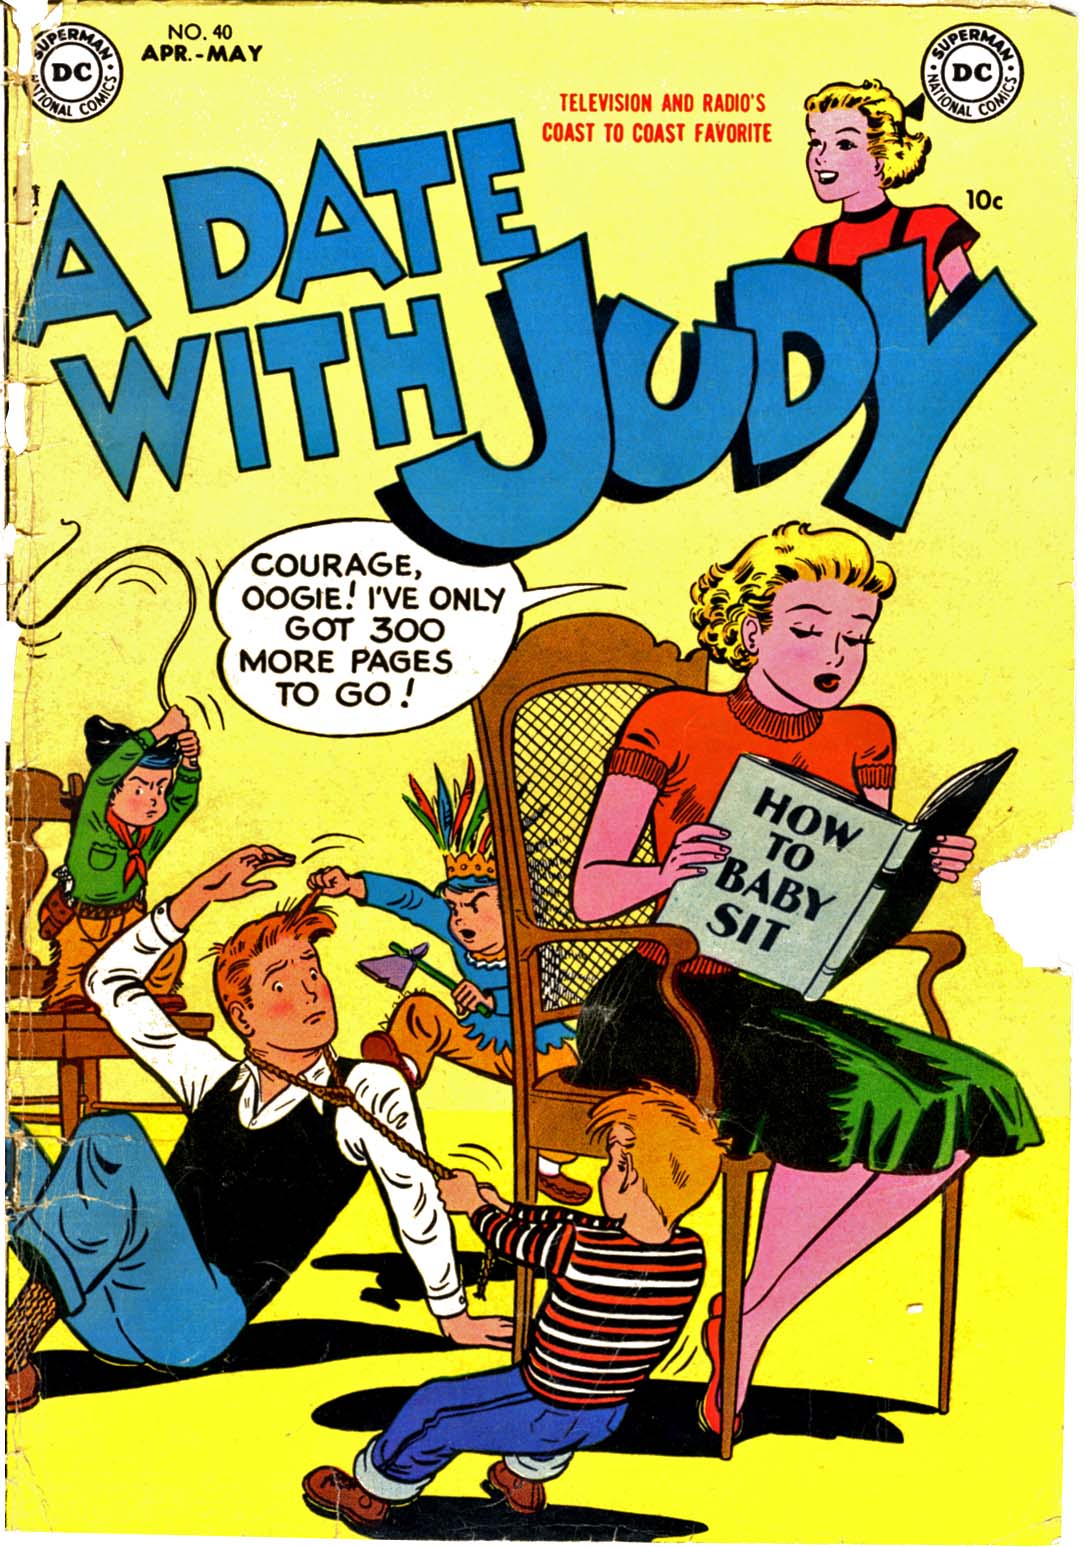 Read online A Date with Judy comic -  Issue #40 - 1